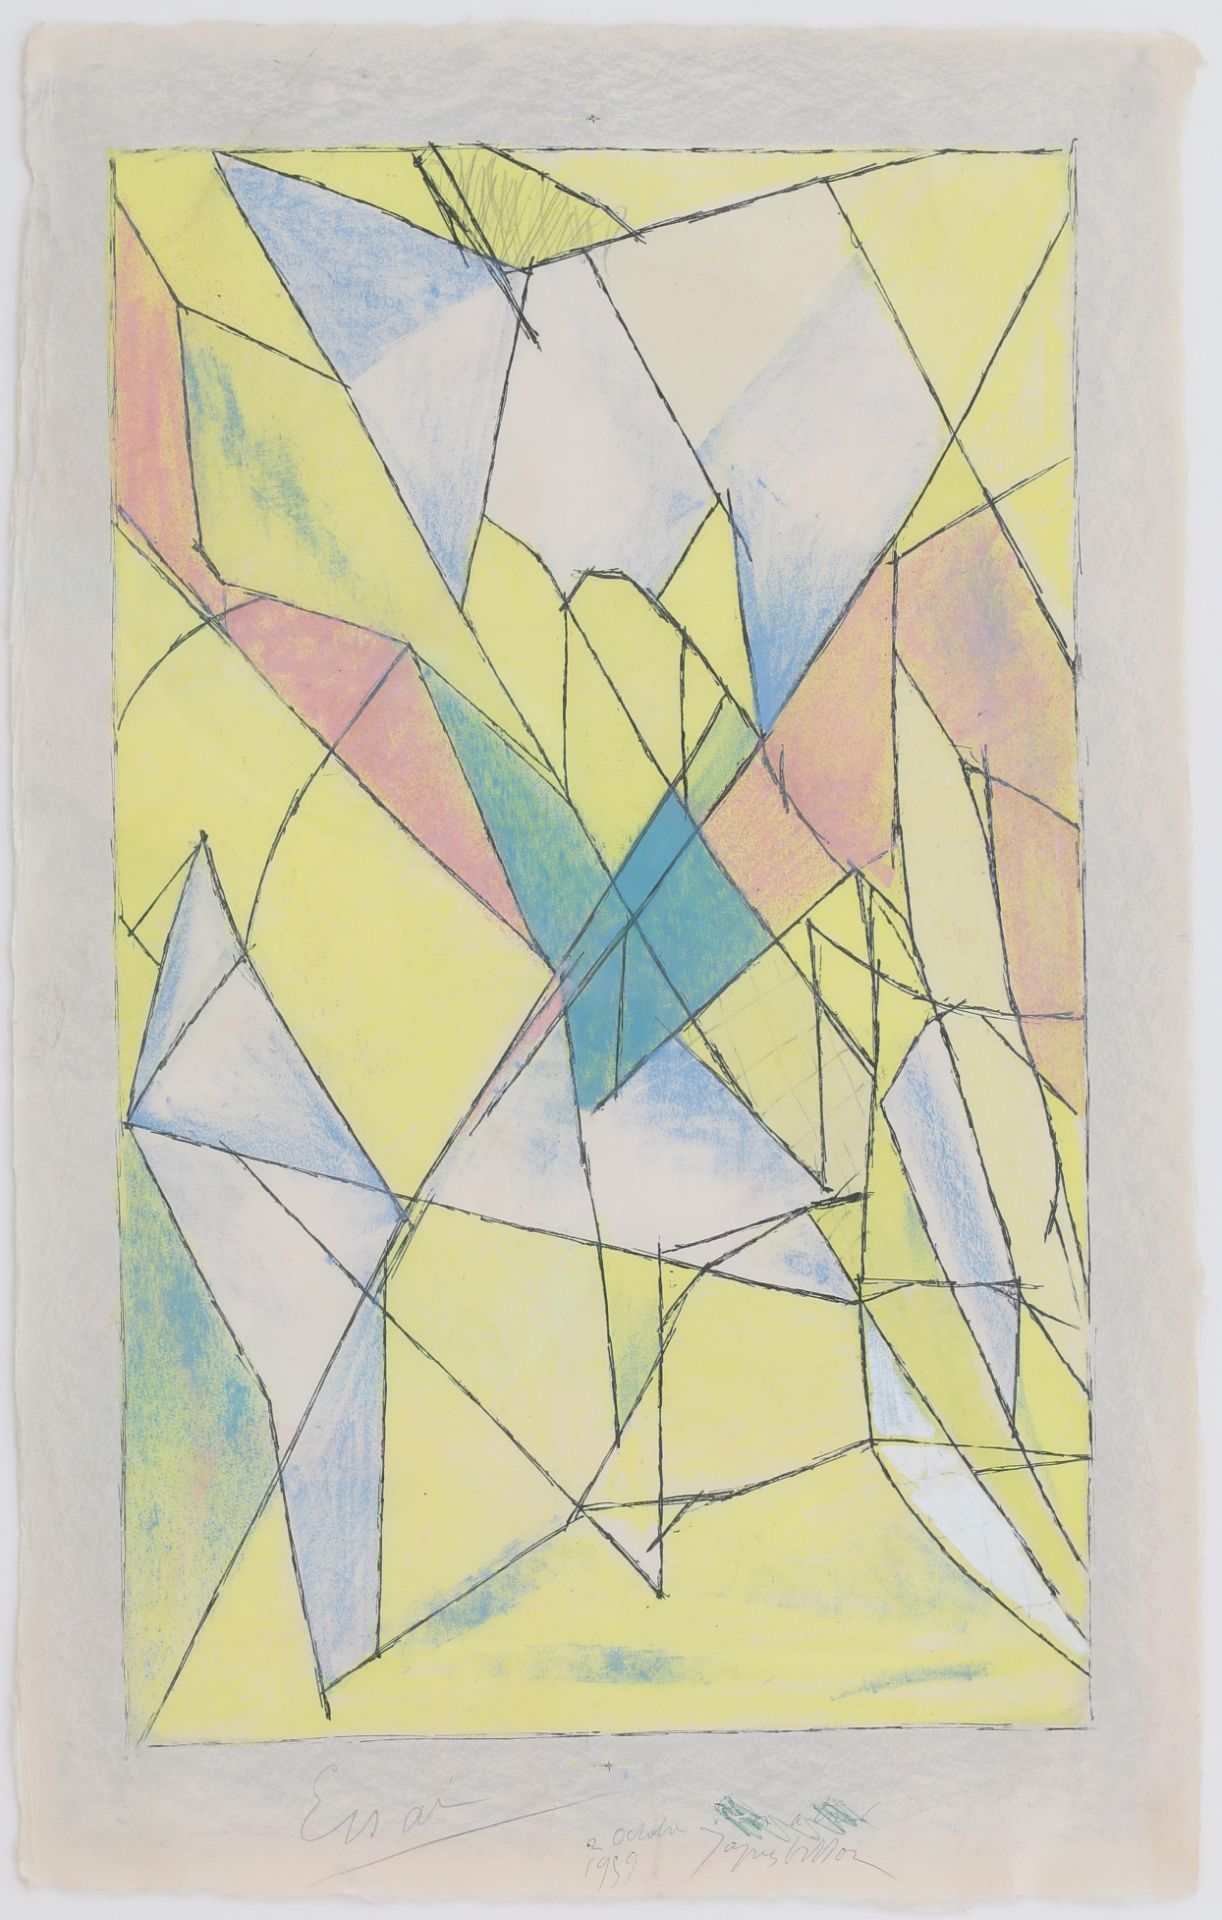 Jacques Villon (1875-1963) Composition. Signed and dated '2 octobre 1959'. Litho 53 x 33 cm. (